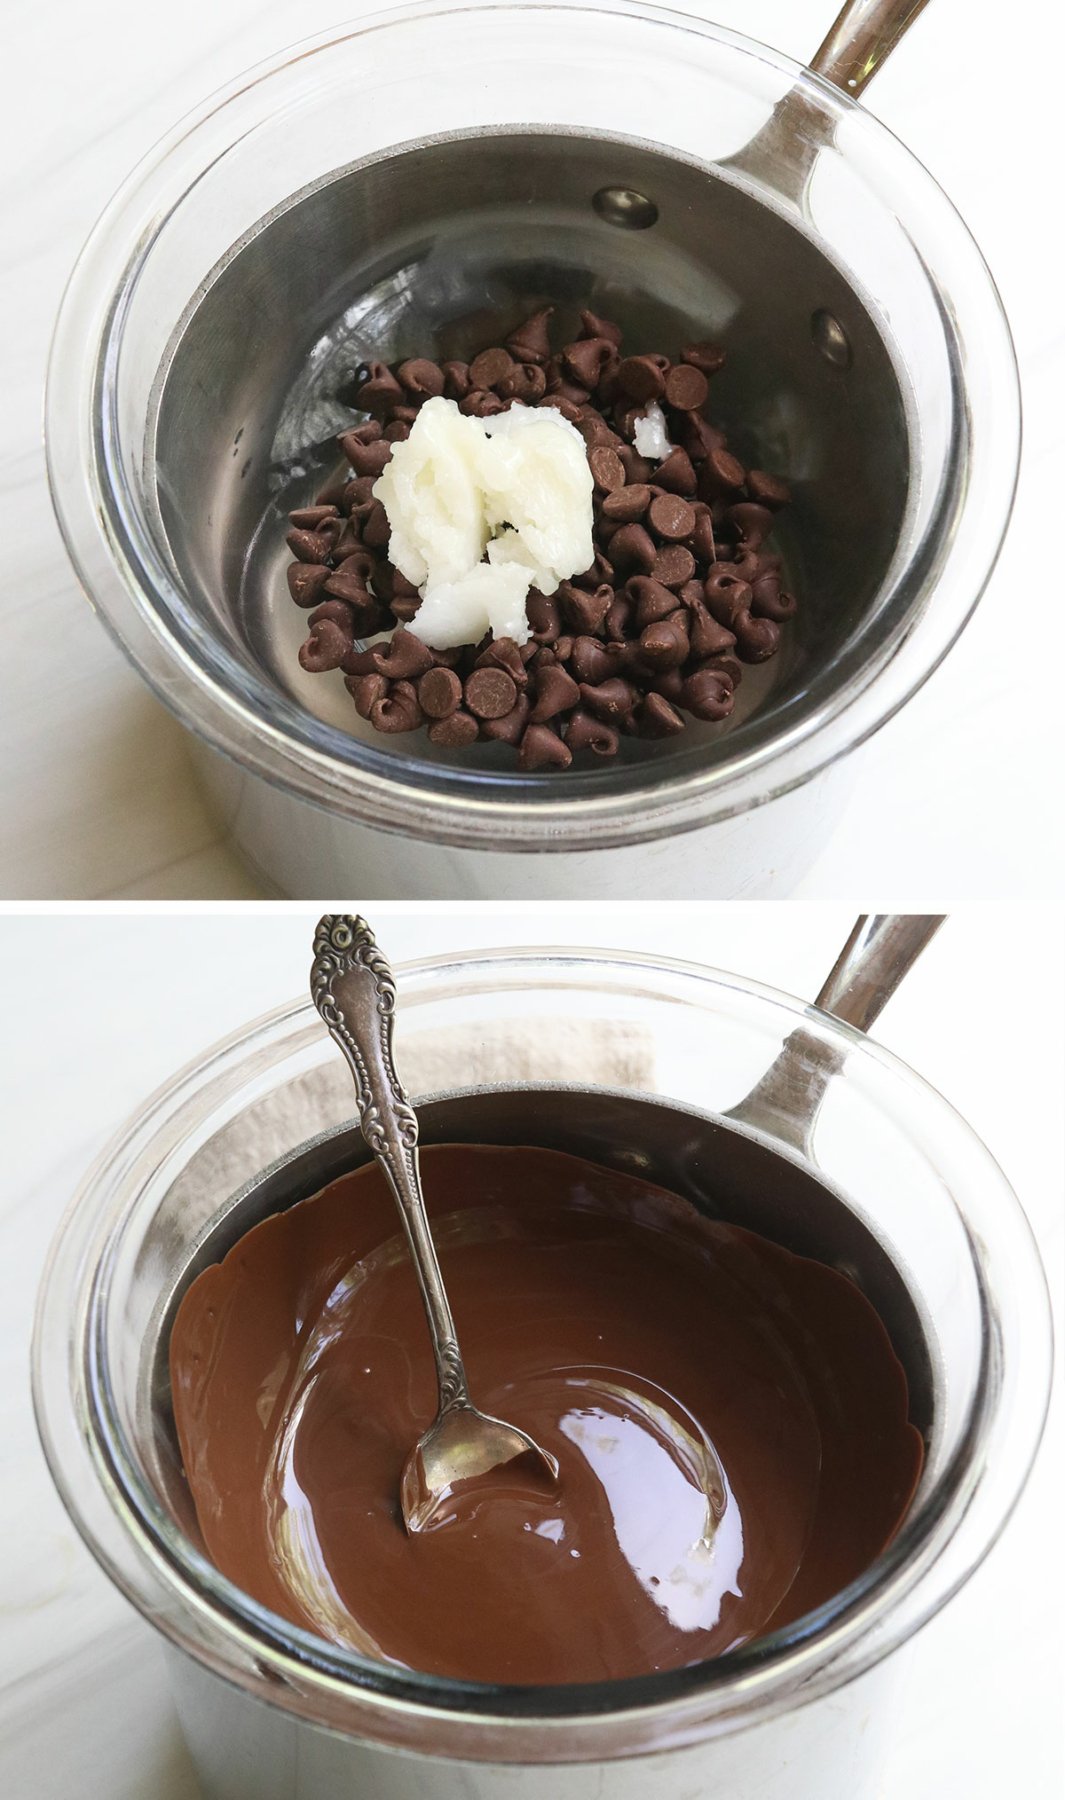 chocolate chips melted with coconut oil until smooth.